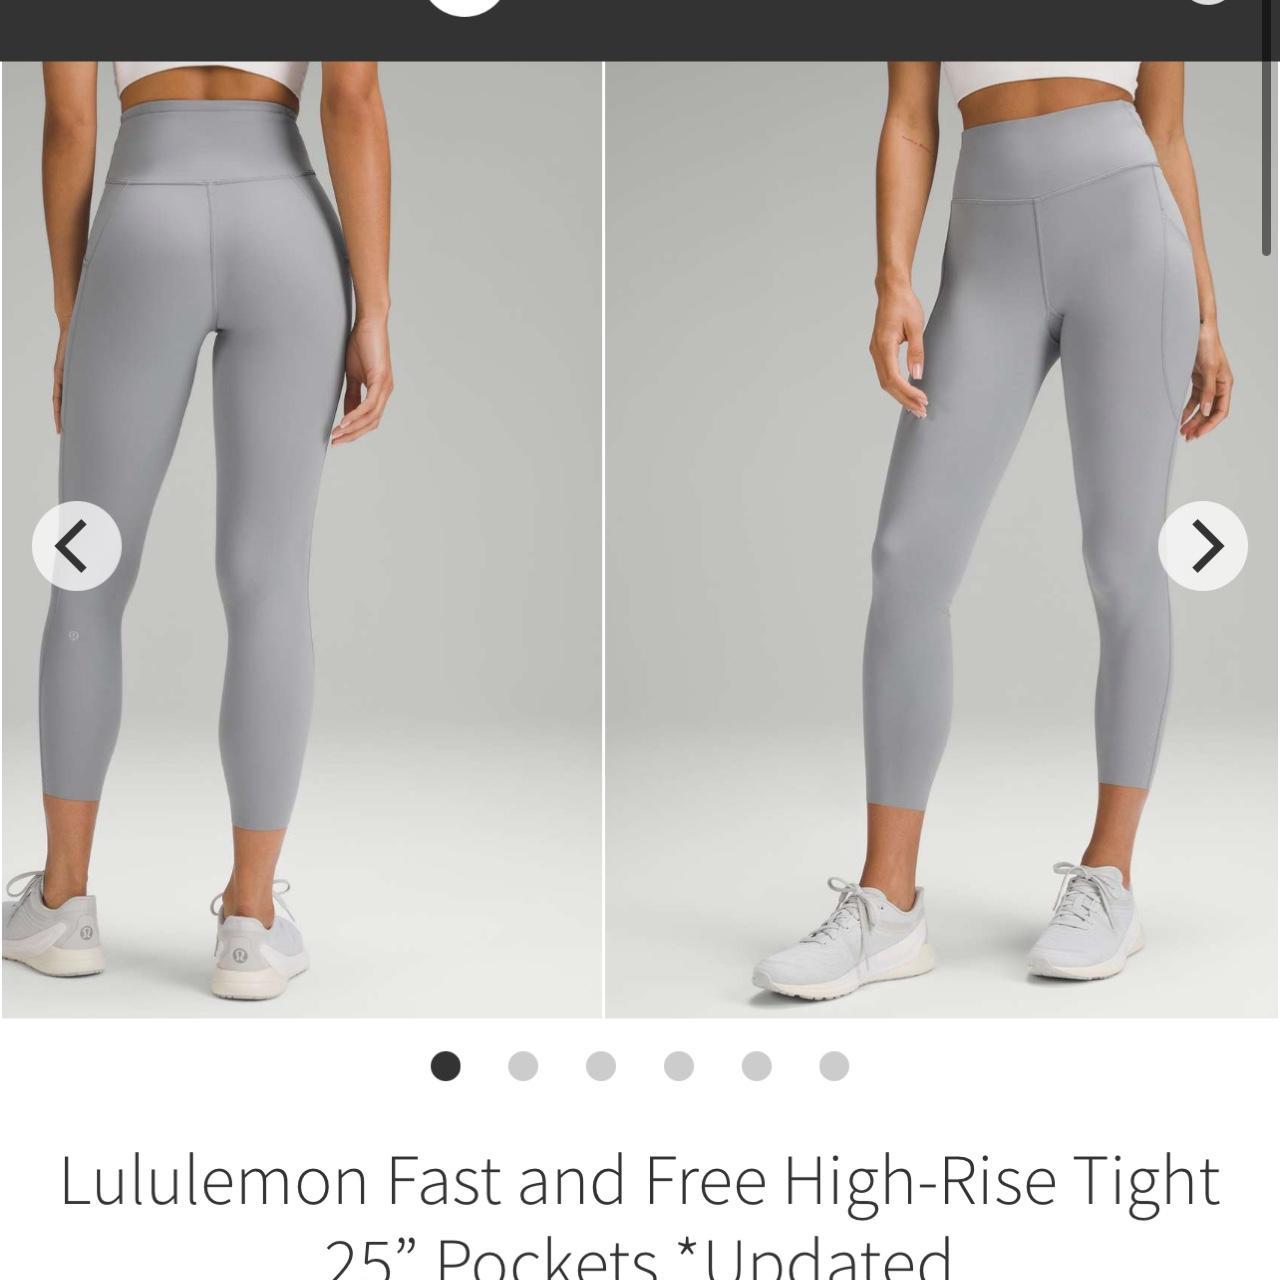 lululemon Fast and Free High-Rise Tight 25 Pockets - Depop